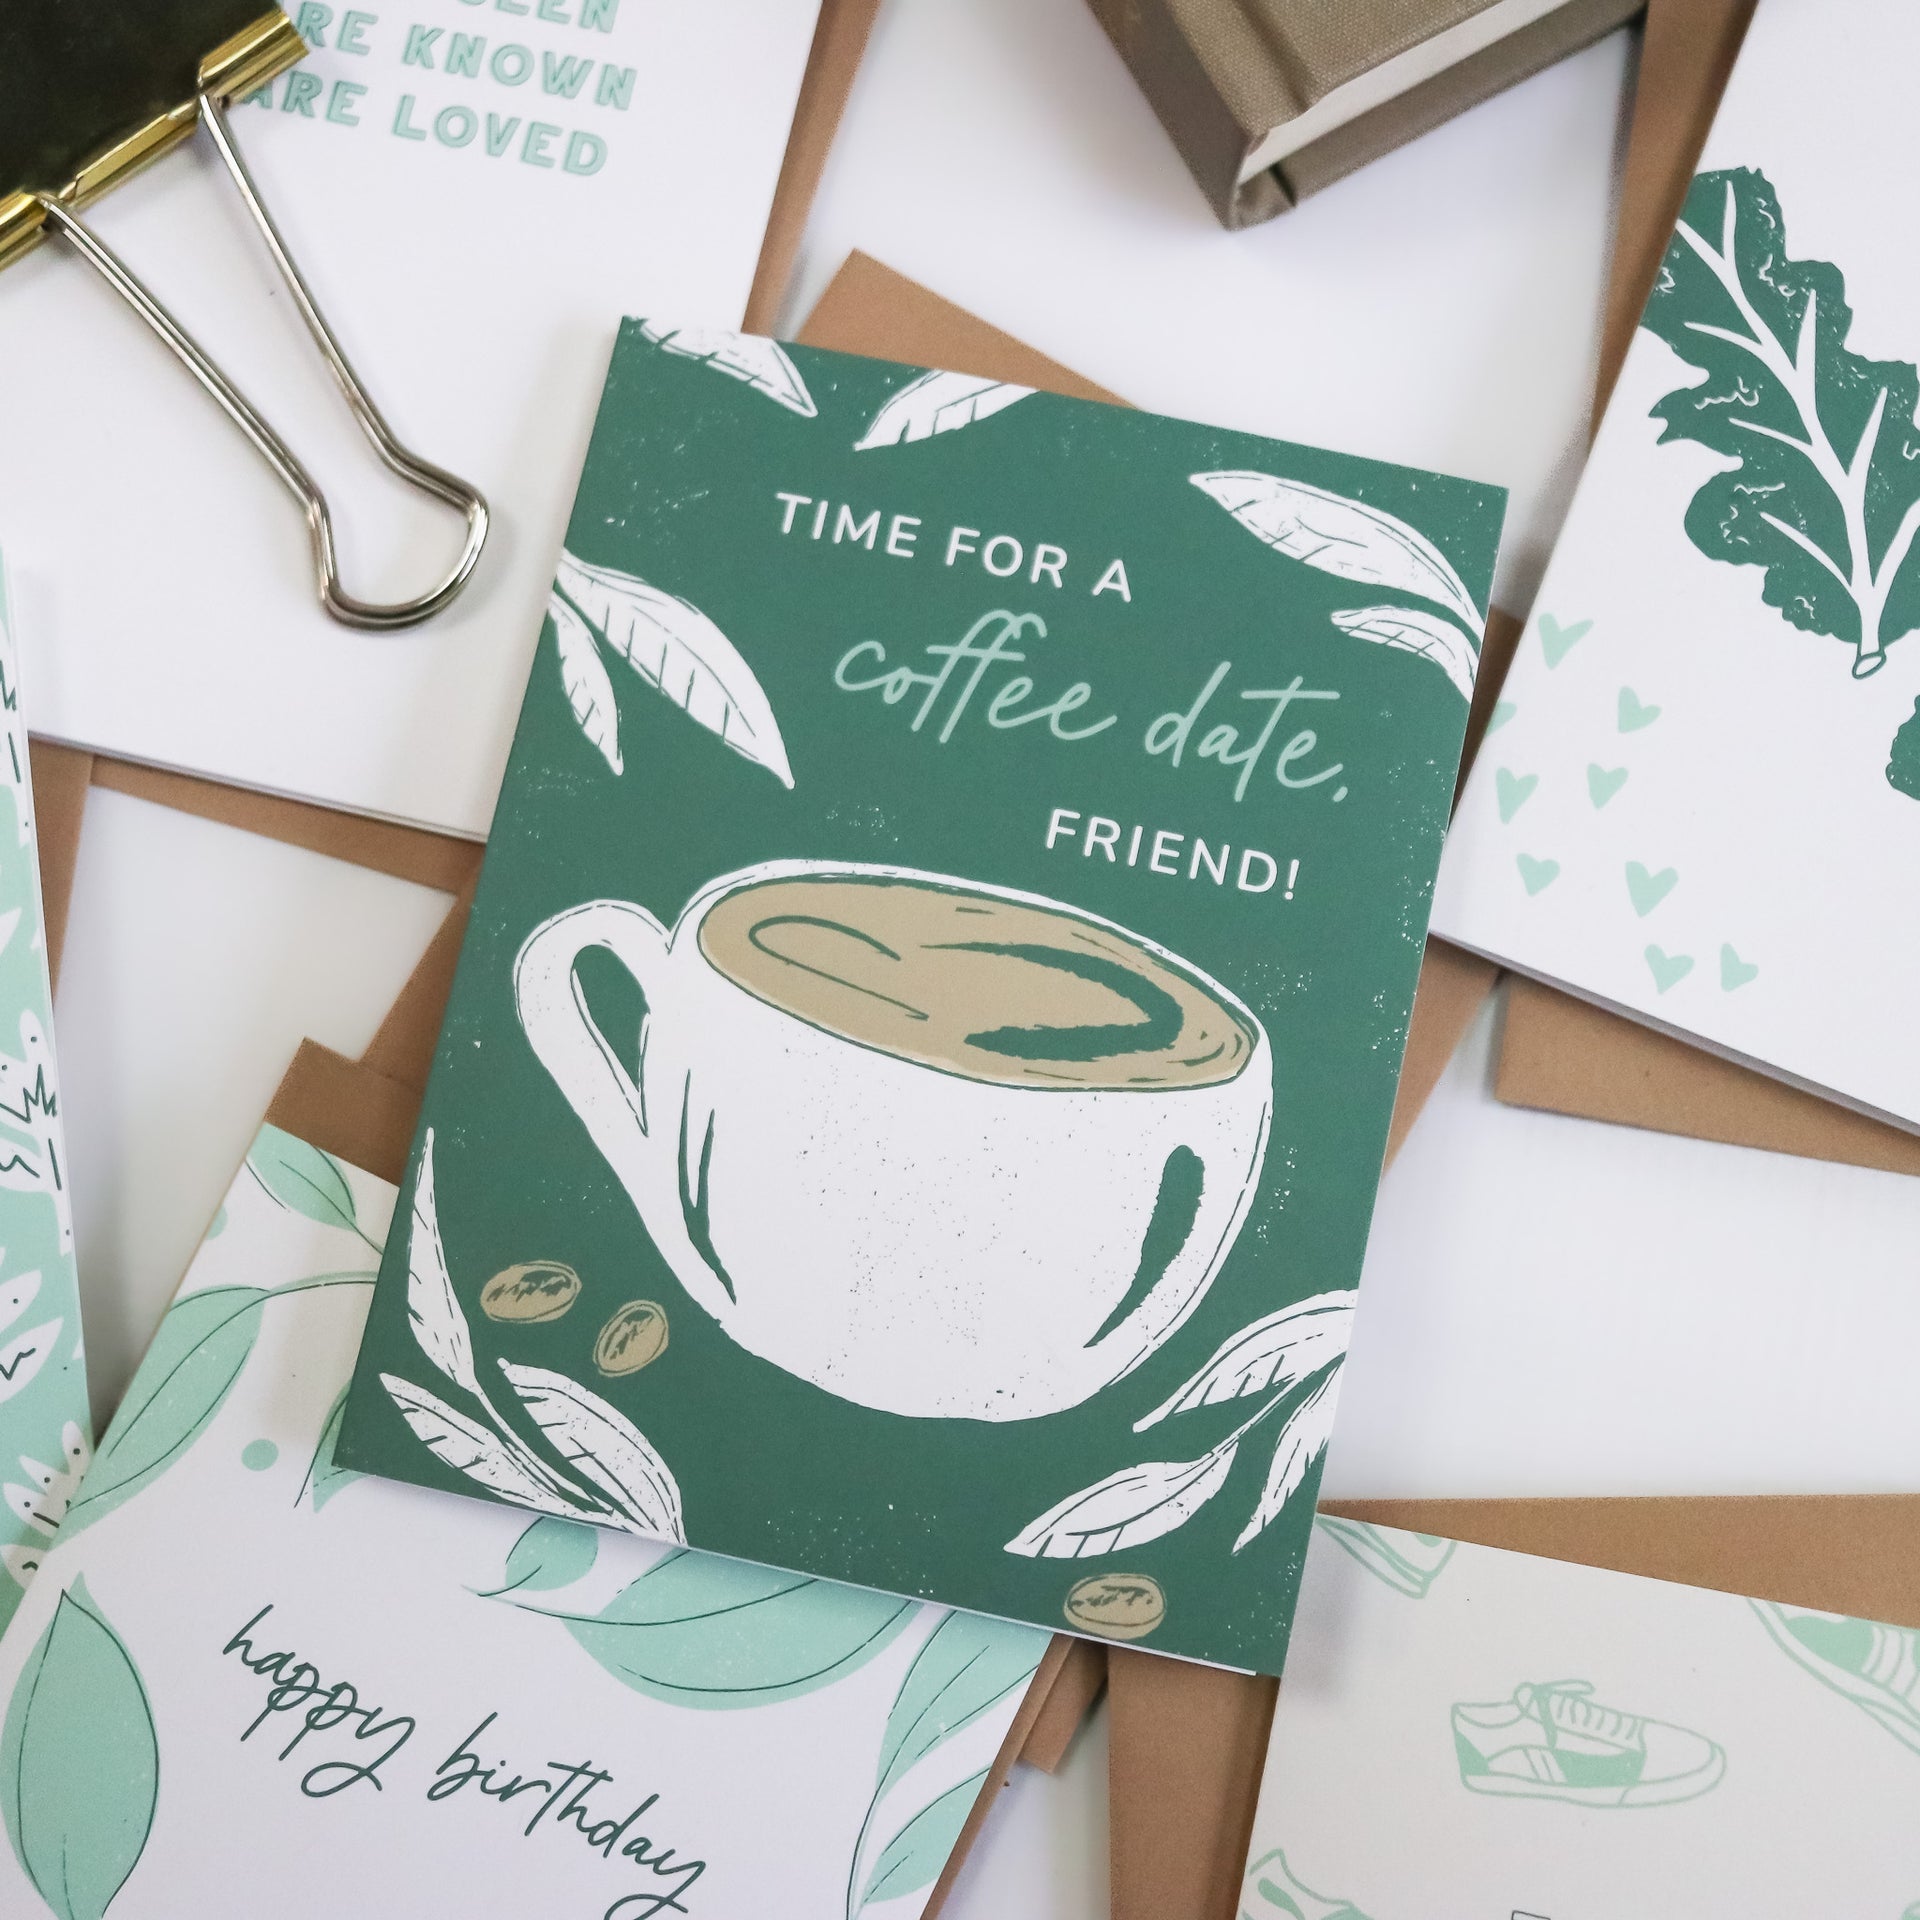 Time for a Coffee Date Friendship Card | Overflow & Co.